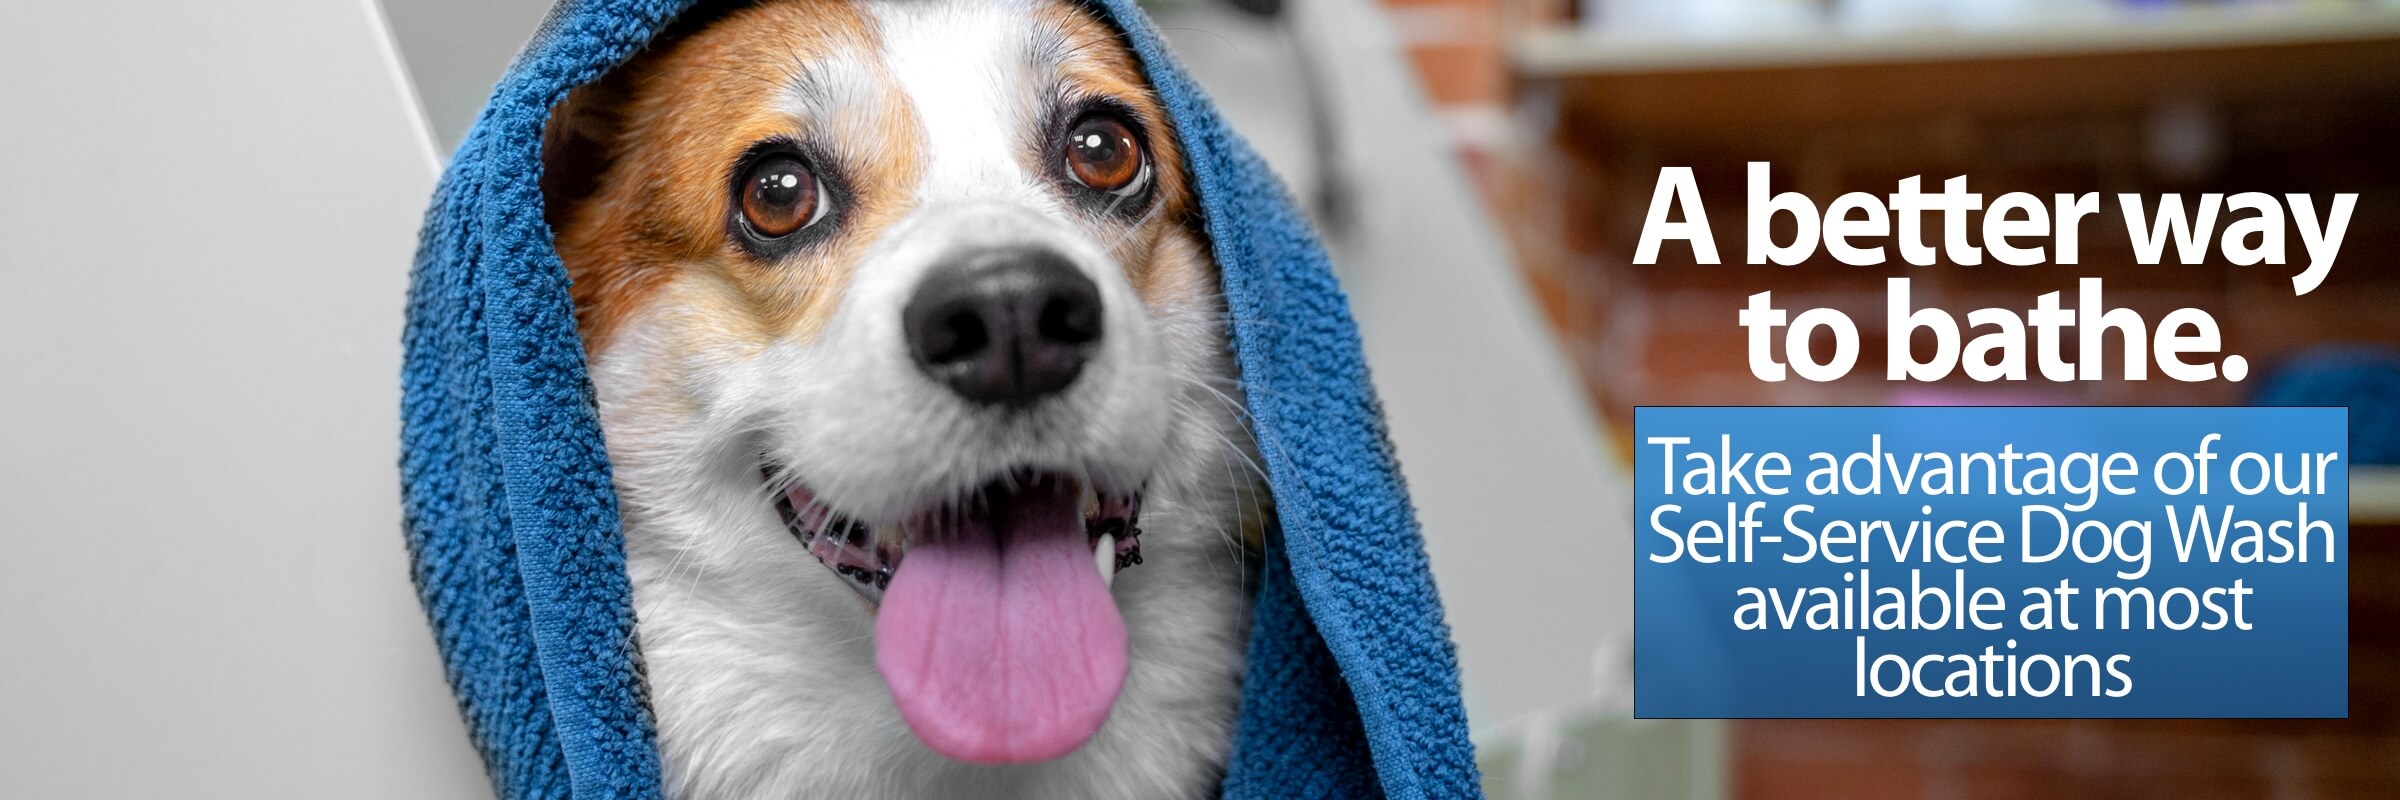 Smiling Corgi with towel draped over its head A better way to bathe Take advantage of our Self Service Dog Wash available at most locations